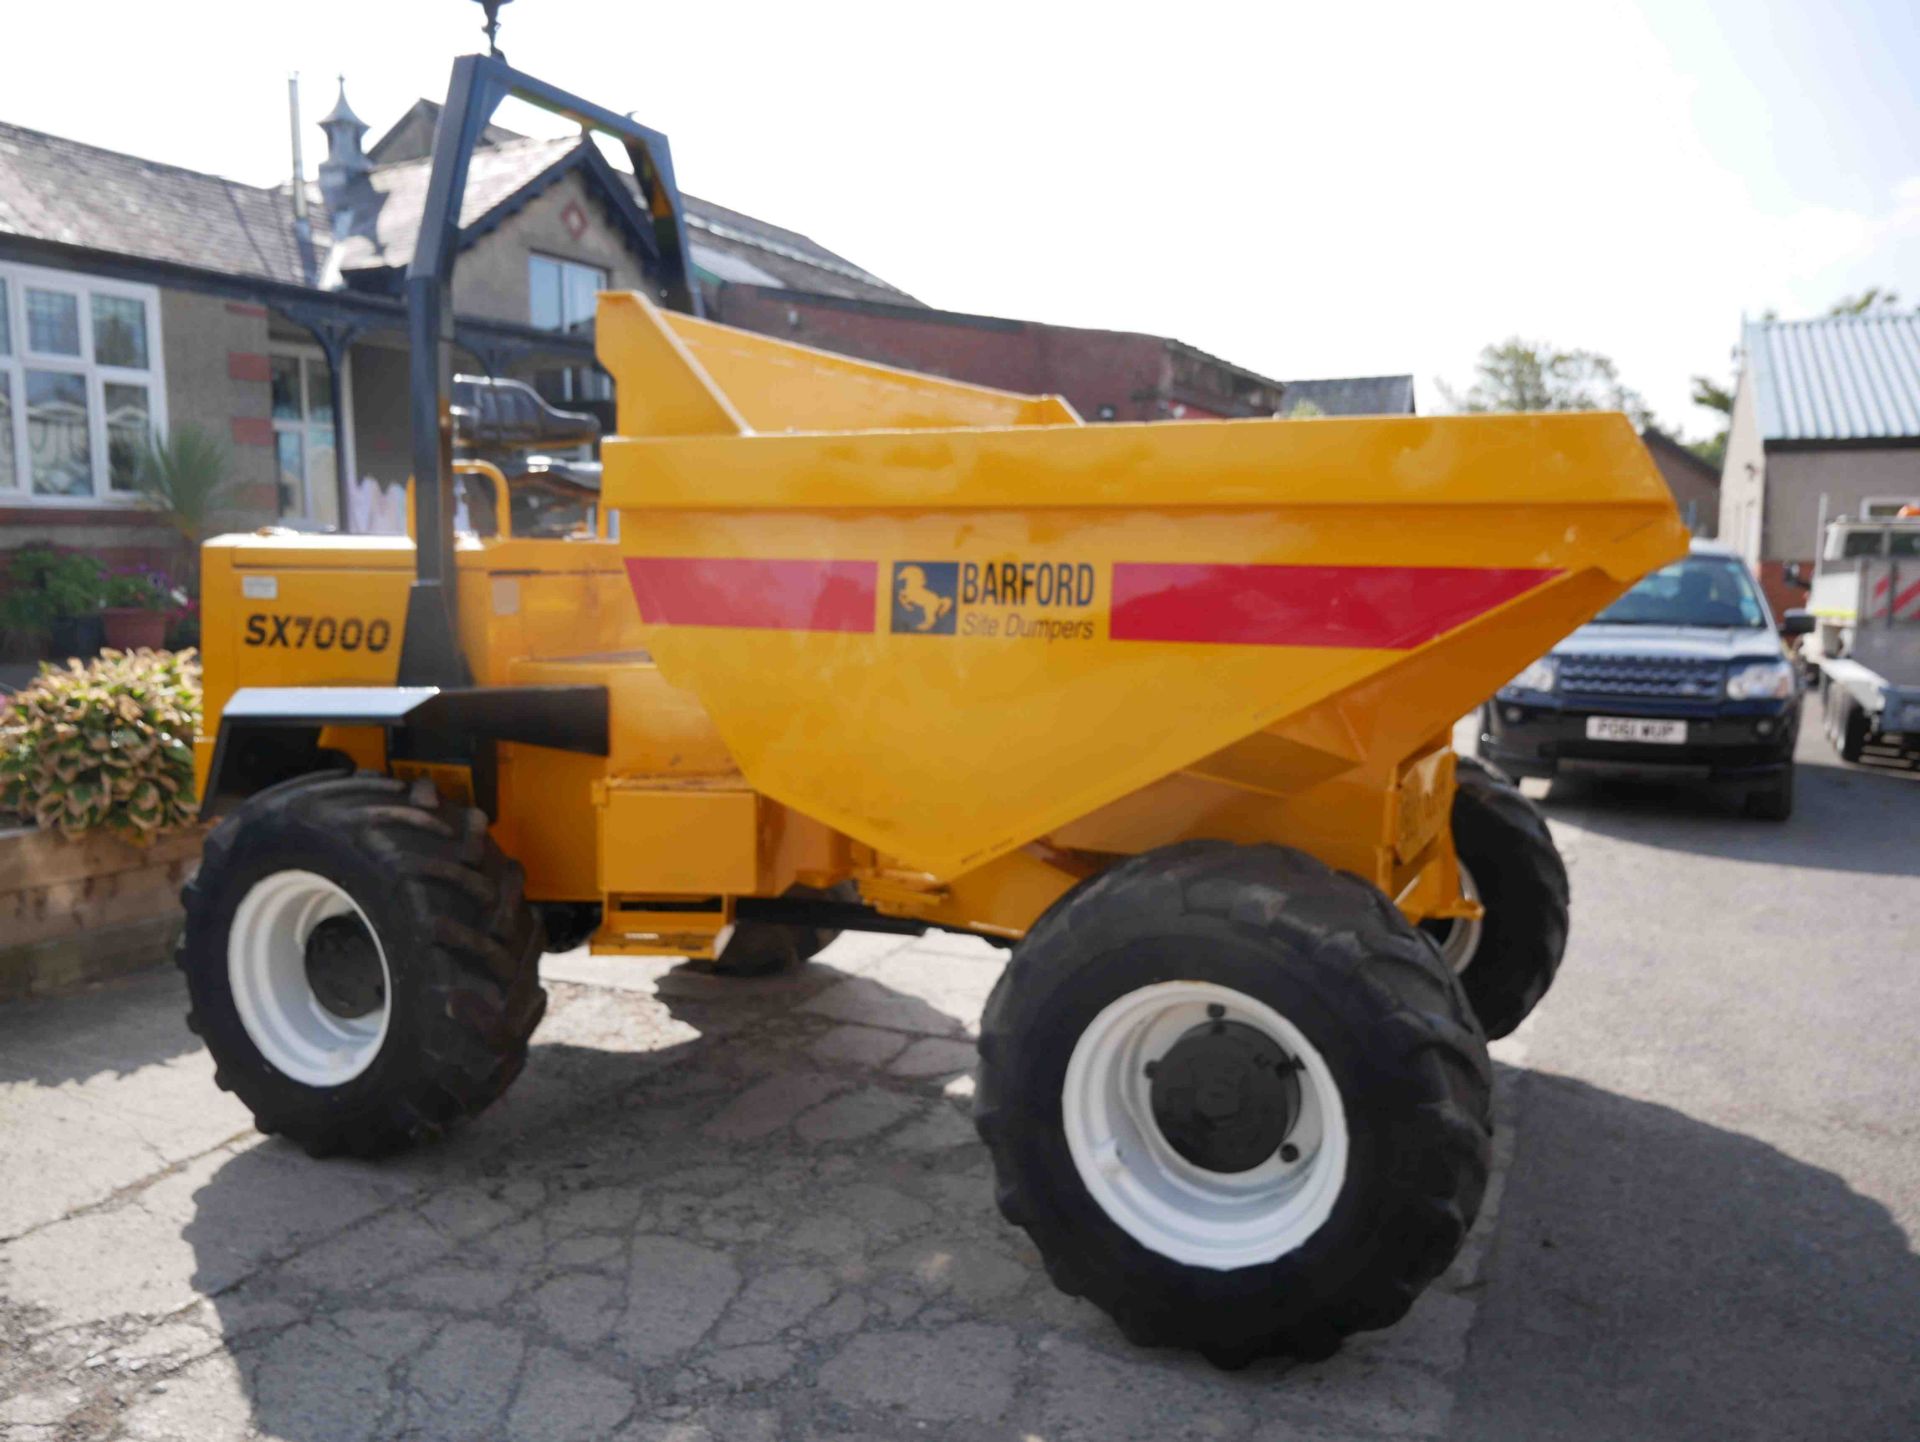 Barford SX7000 DUMPER, year of manufacture 2004, 3174 indicated hours (at time of listing), - Image 2 of 4